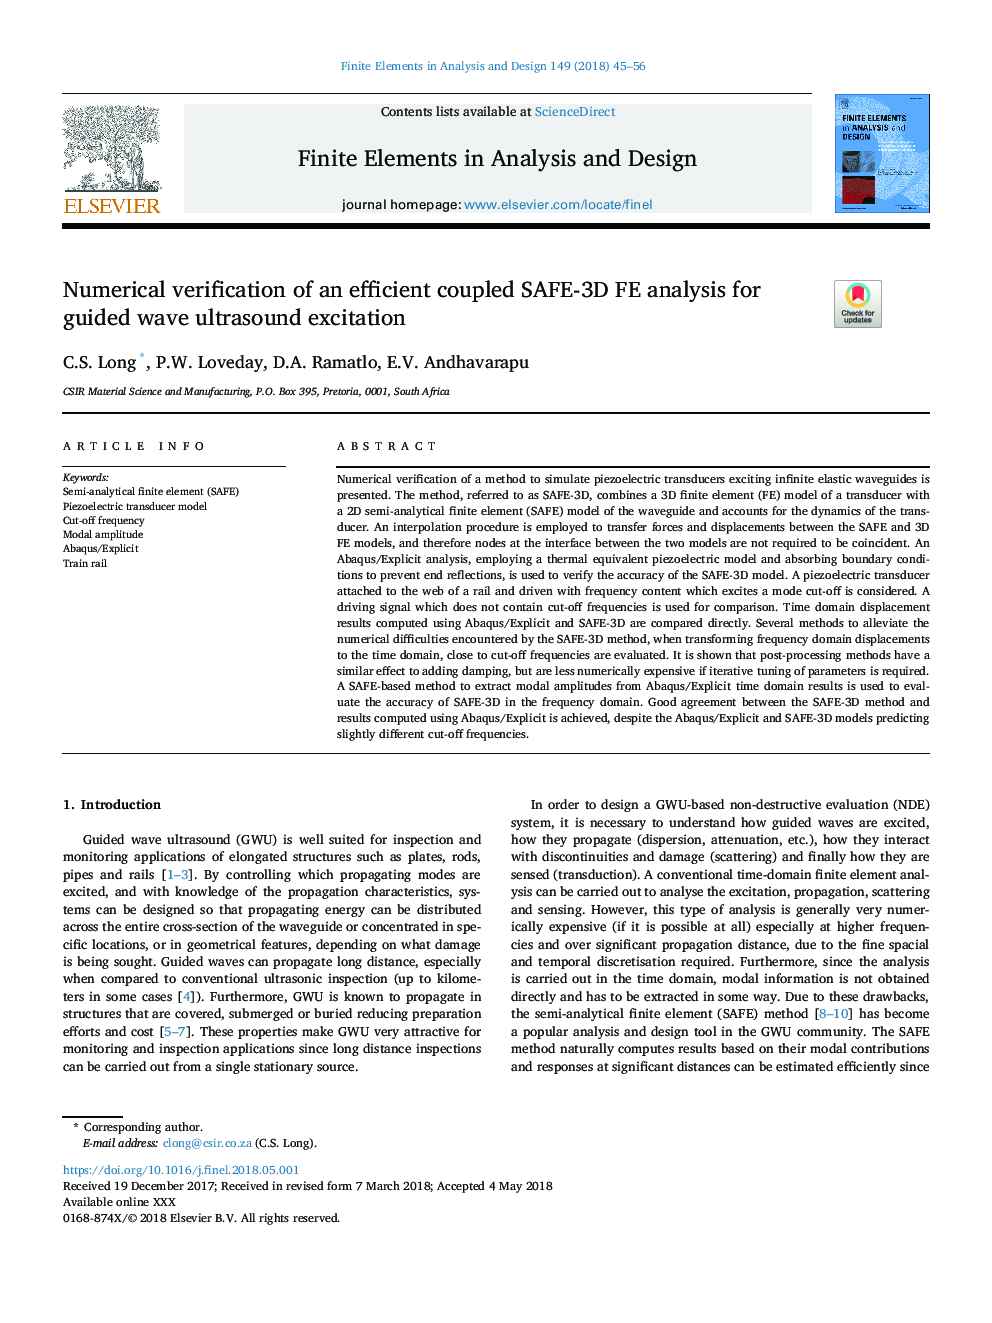 Numerical verification of an efficient coupled SAFE-3D FE analysis for guided wave ultrasound excitation